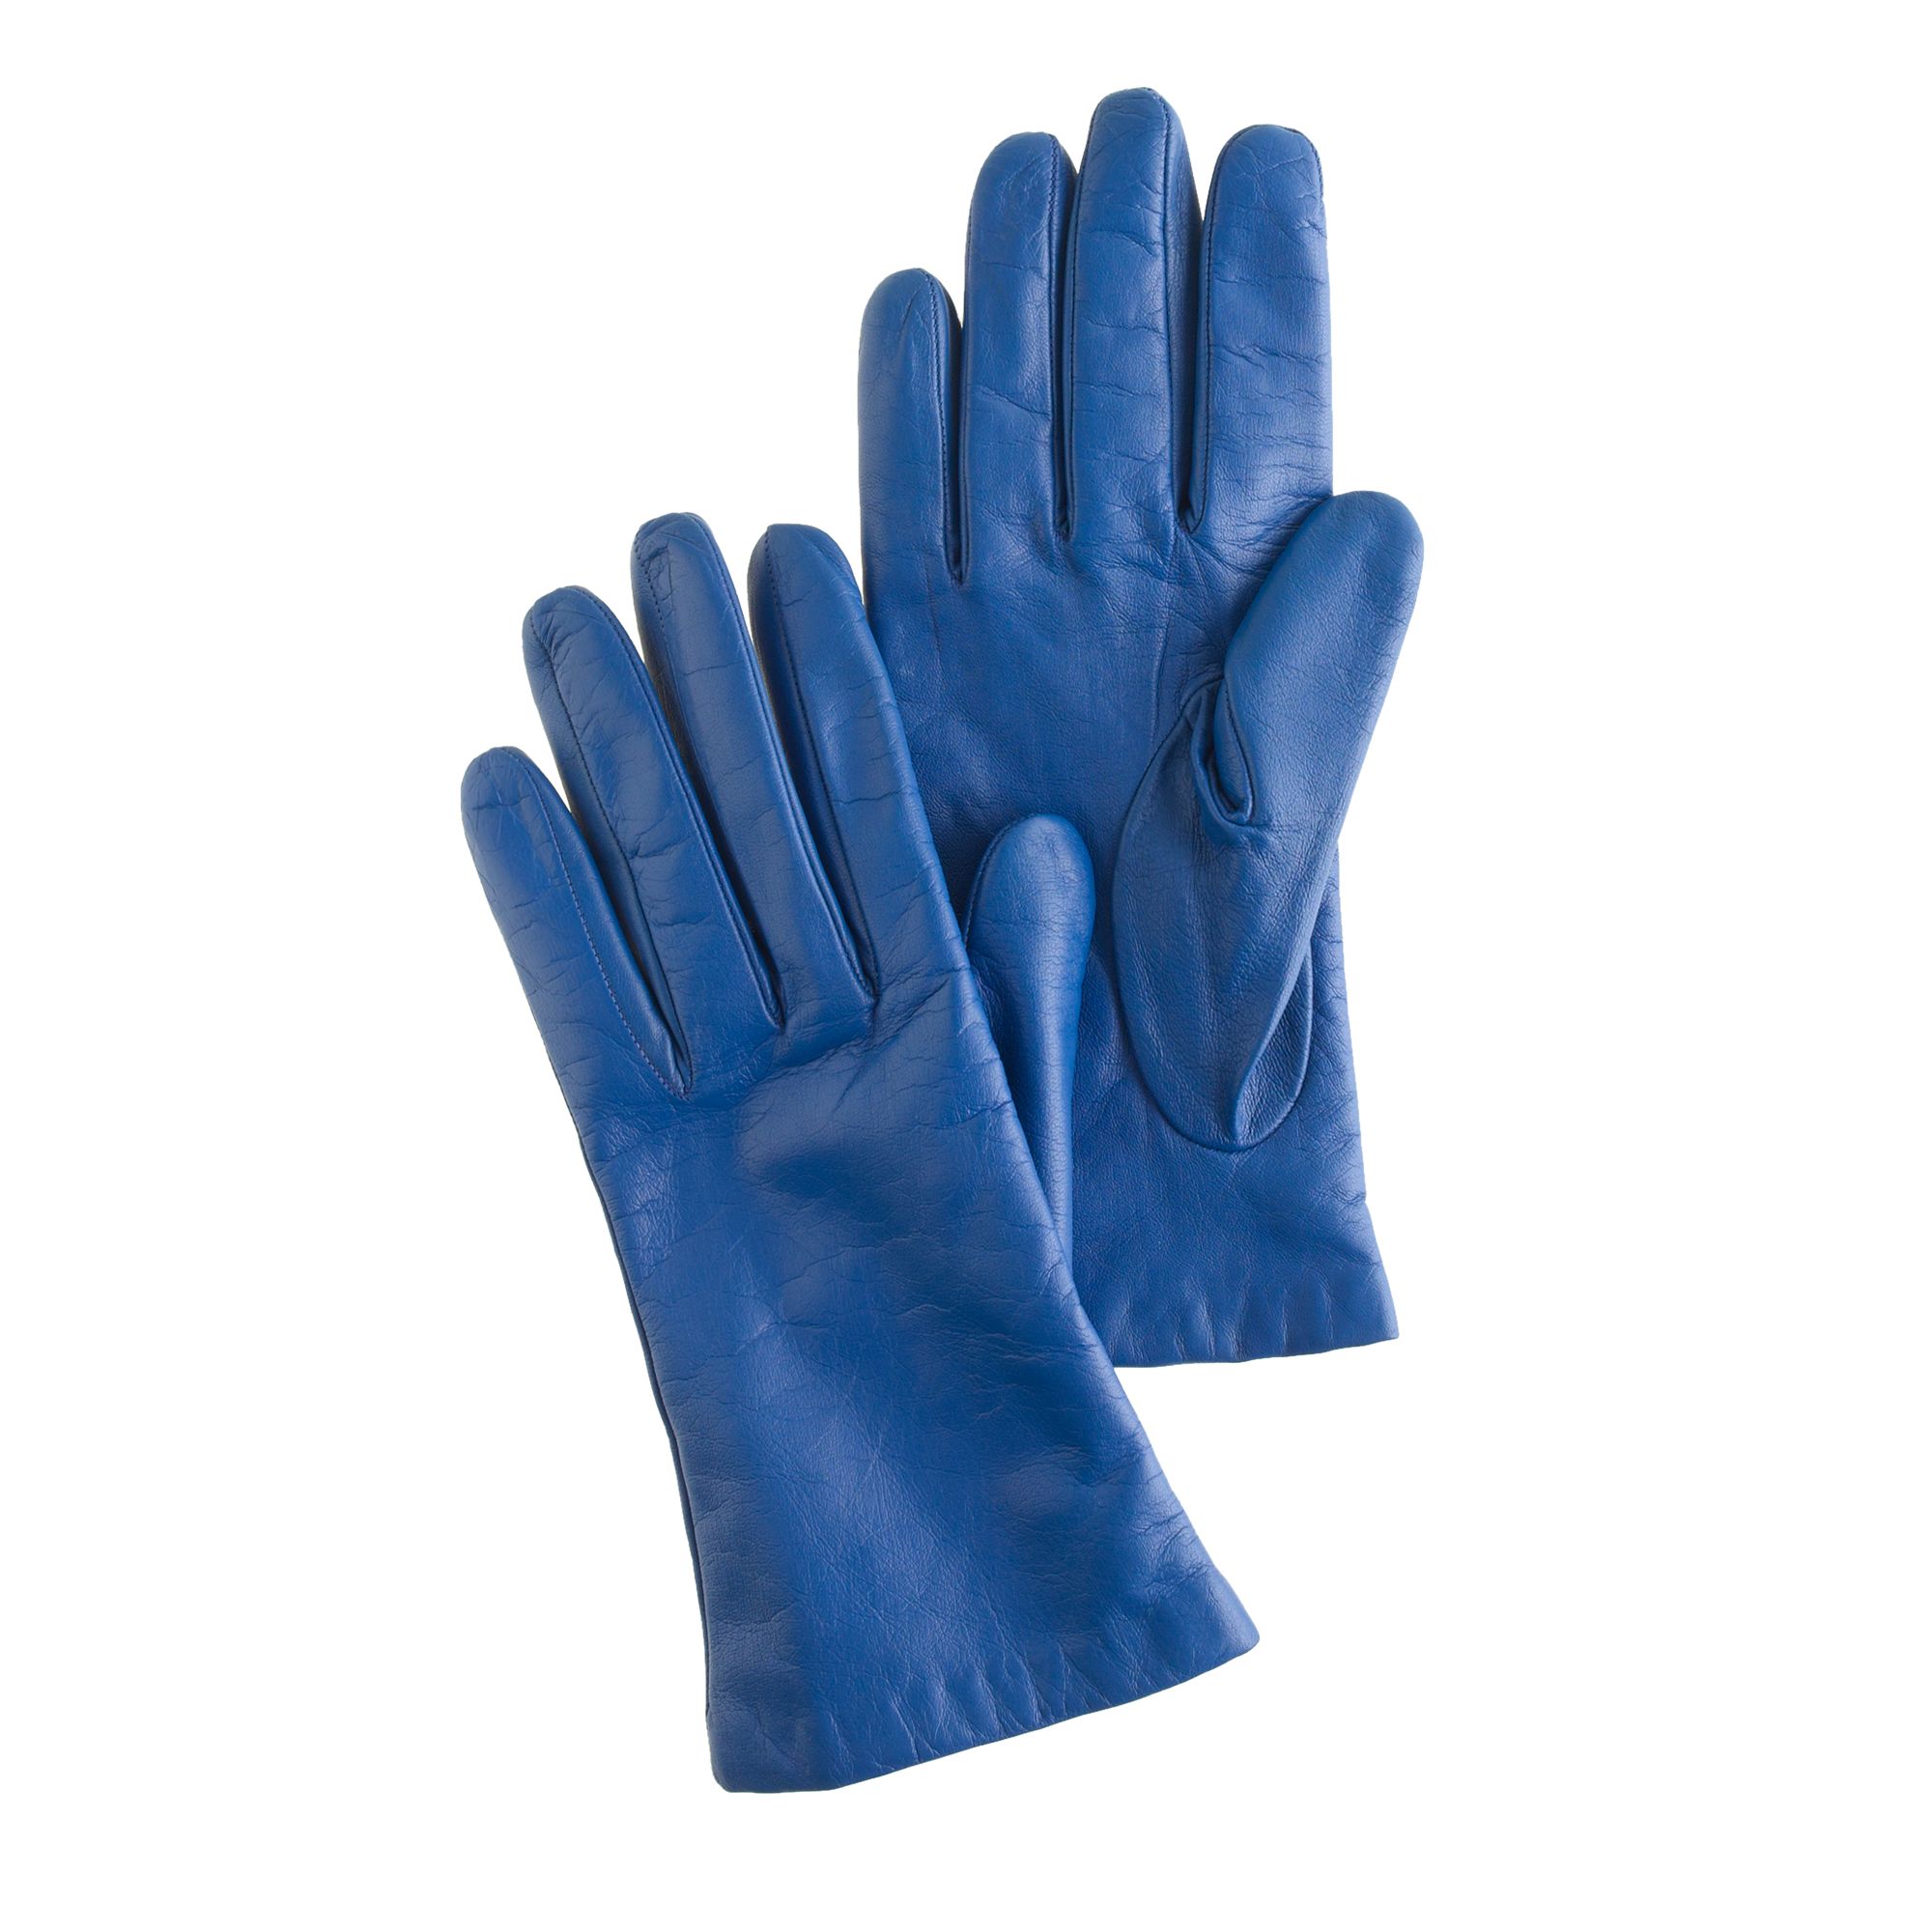 J.crew Smartphone Leather Gloves in Blue (brilliant blue) | Lyst